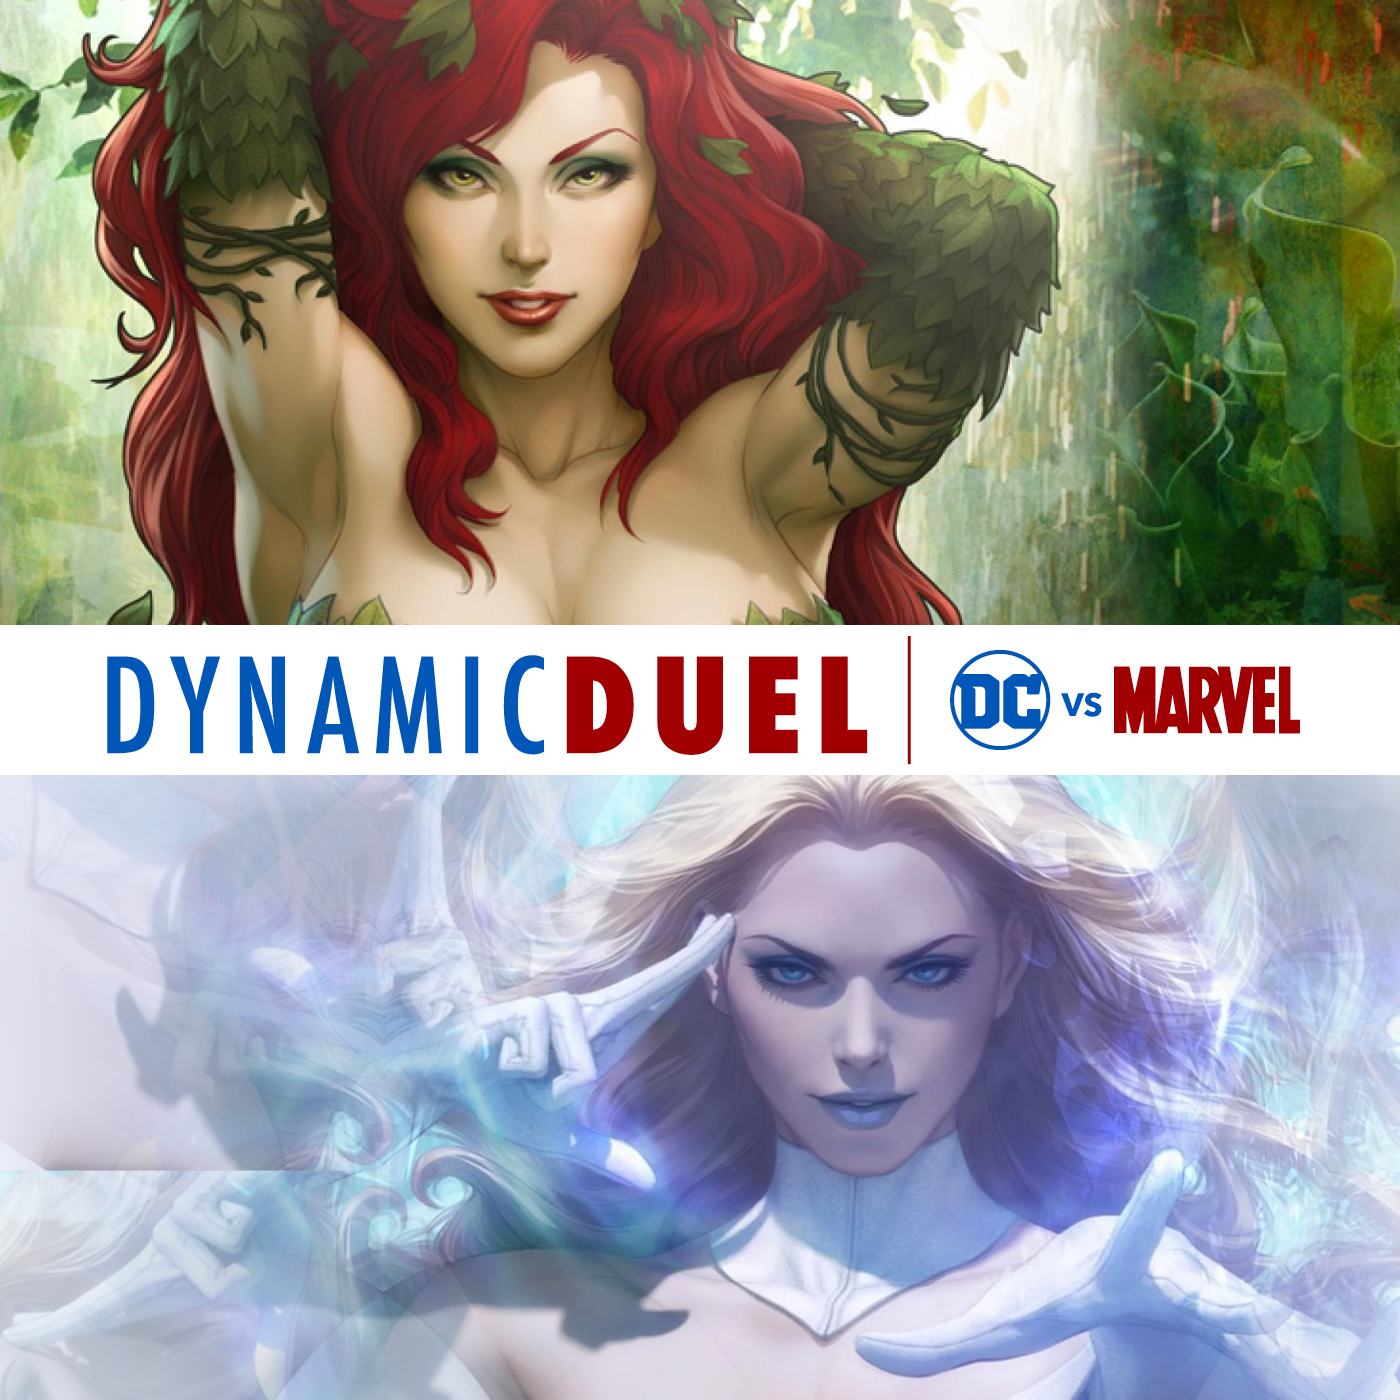 Poison Ivy vs White Queen (Emma Frost) Image